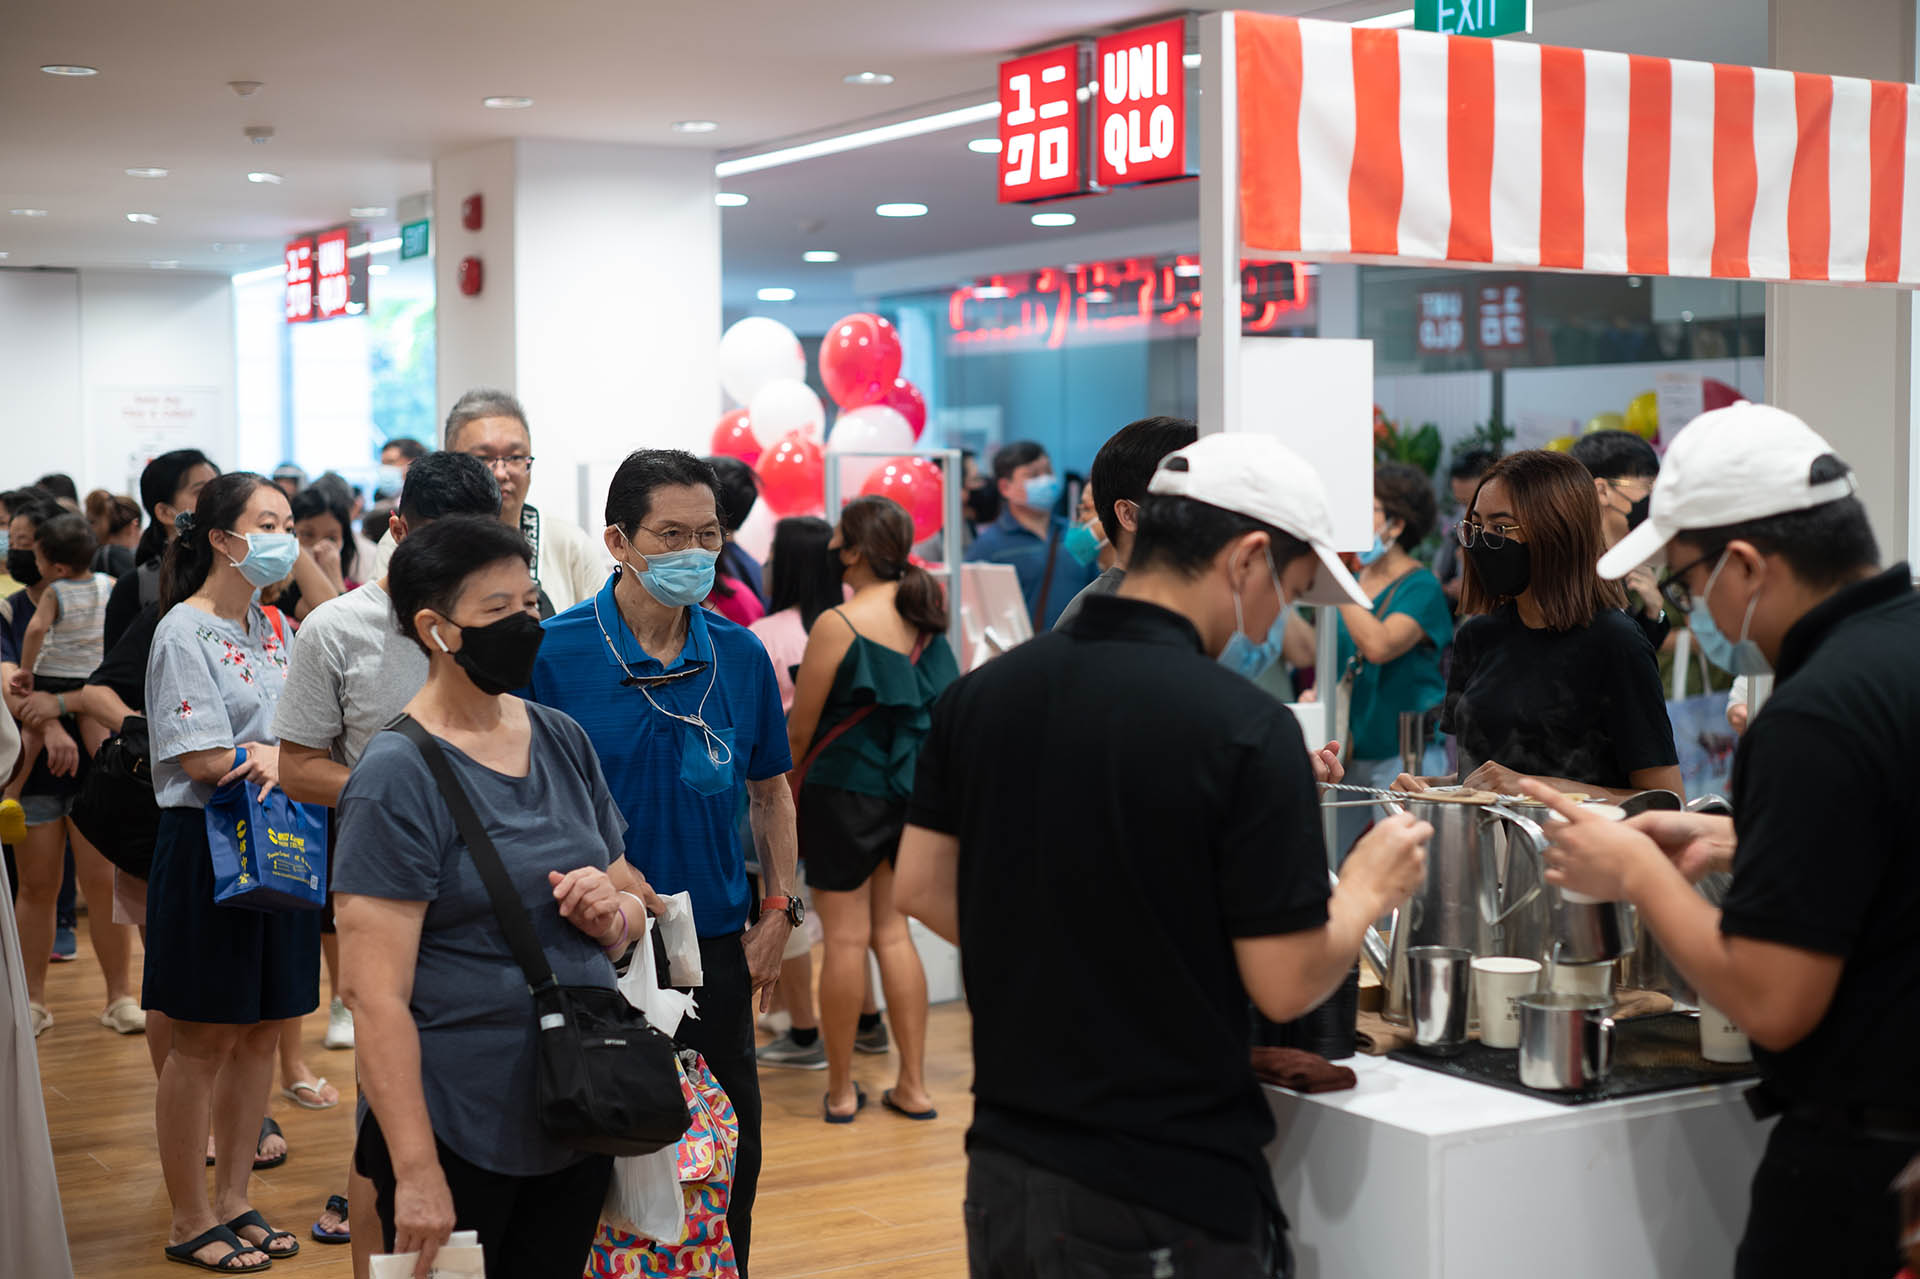 04 UNIQLO 51@AMK - Queue for complimentary treats from Toast Box (To credit UNIQLO Singapore)